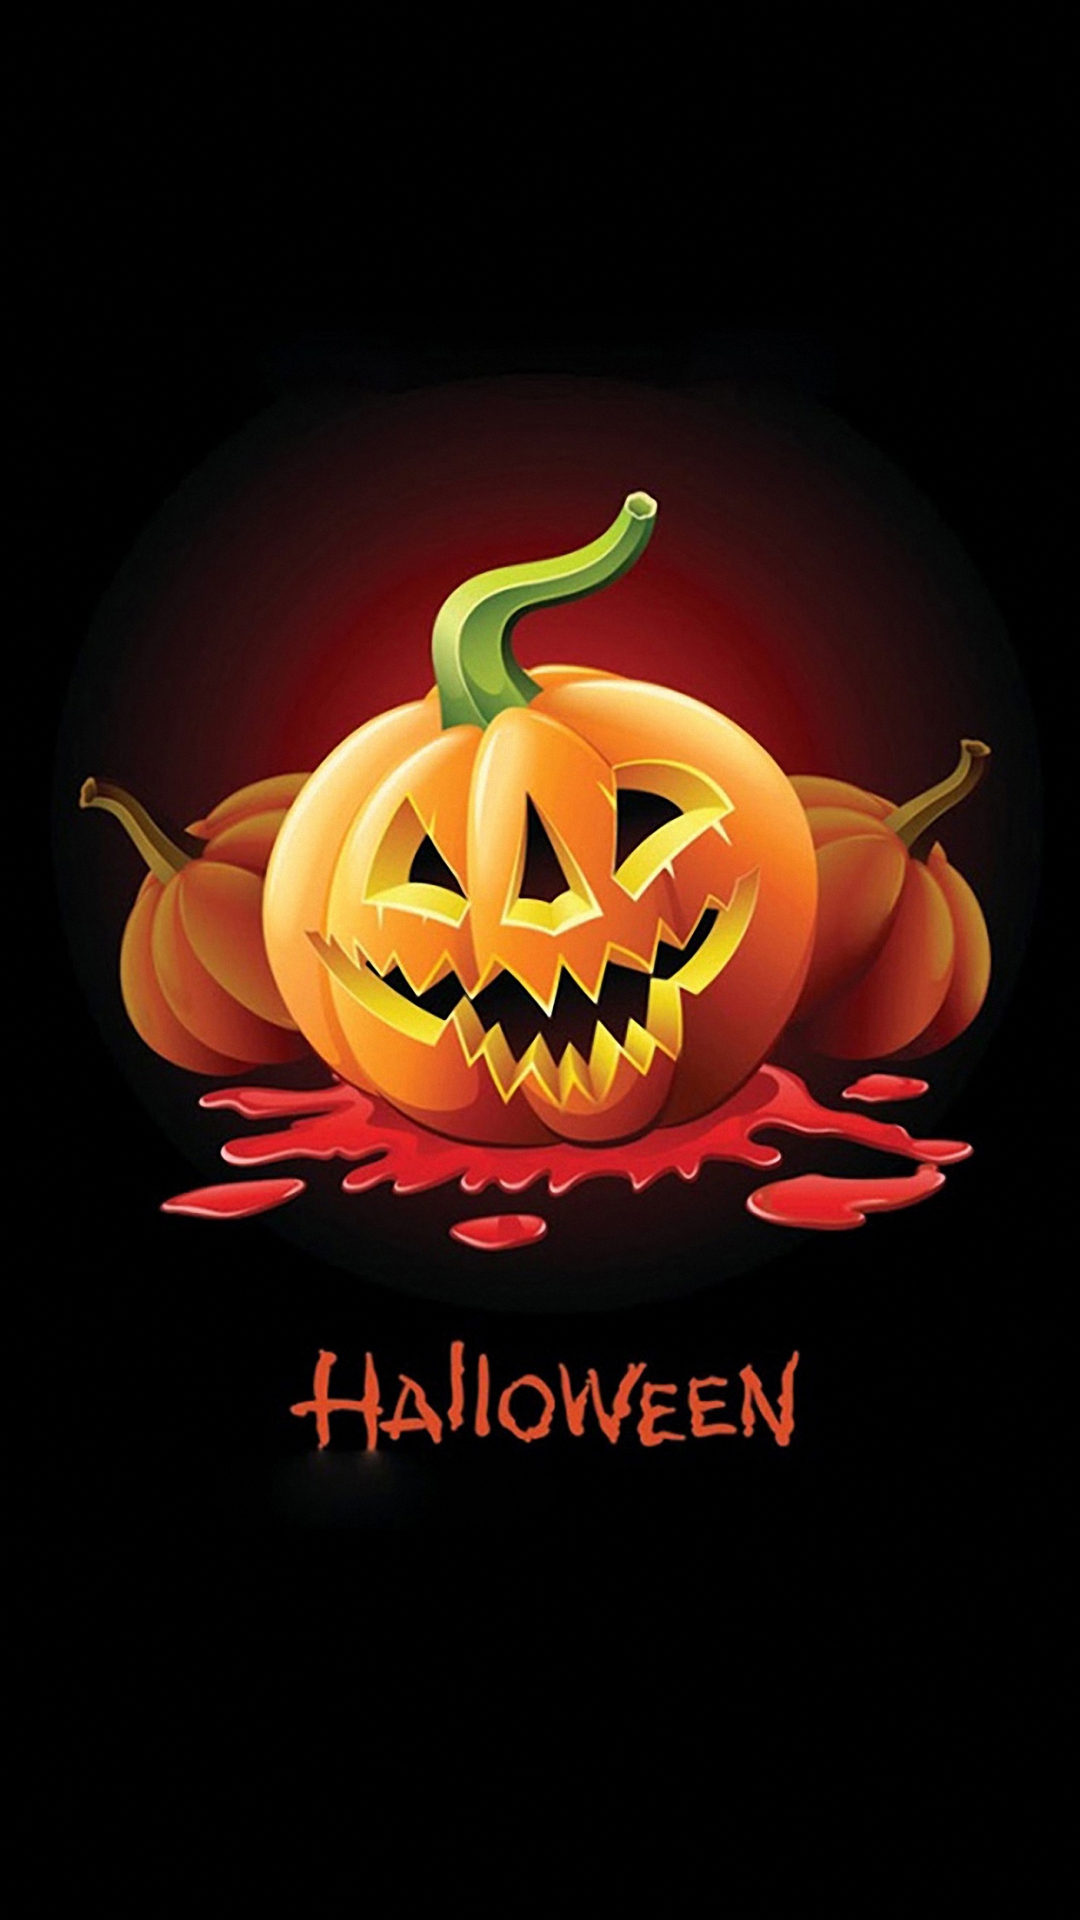 Halloween games online for adults